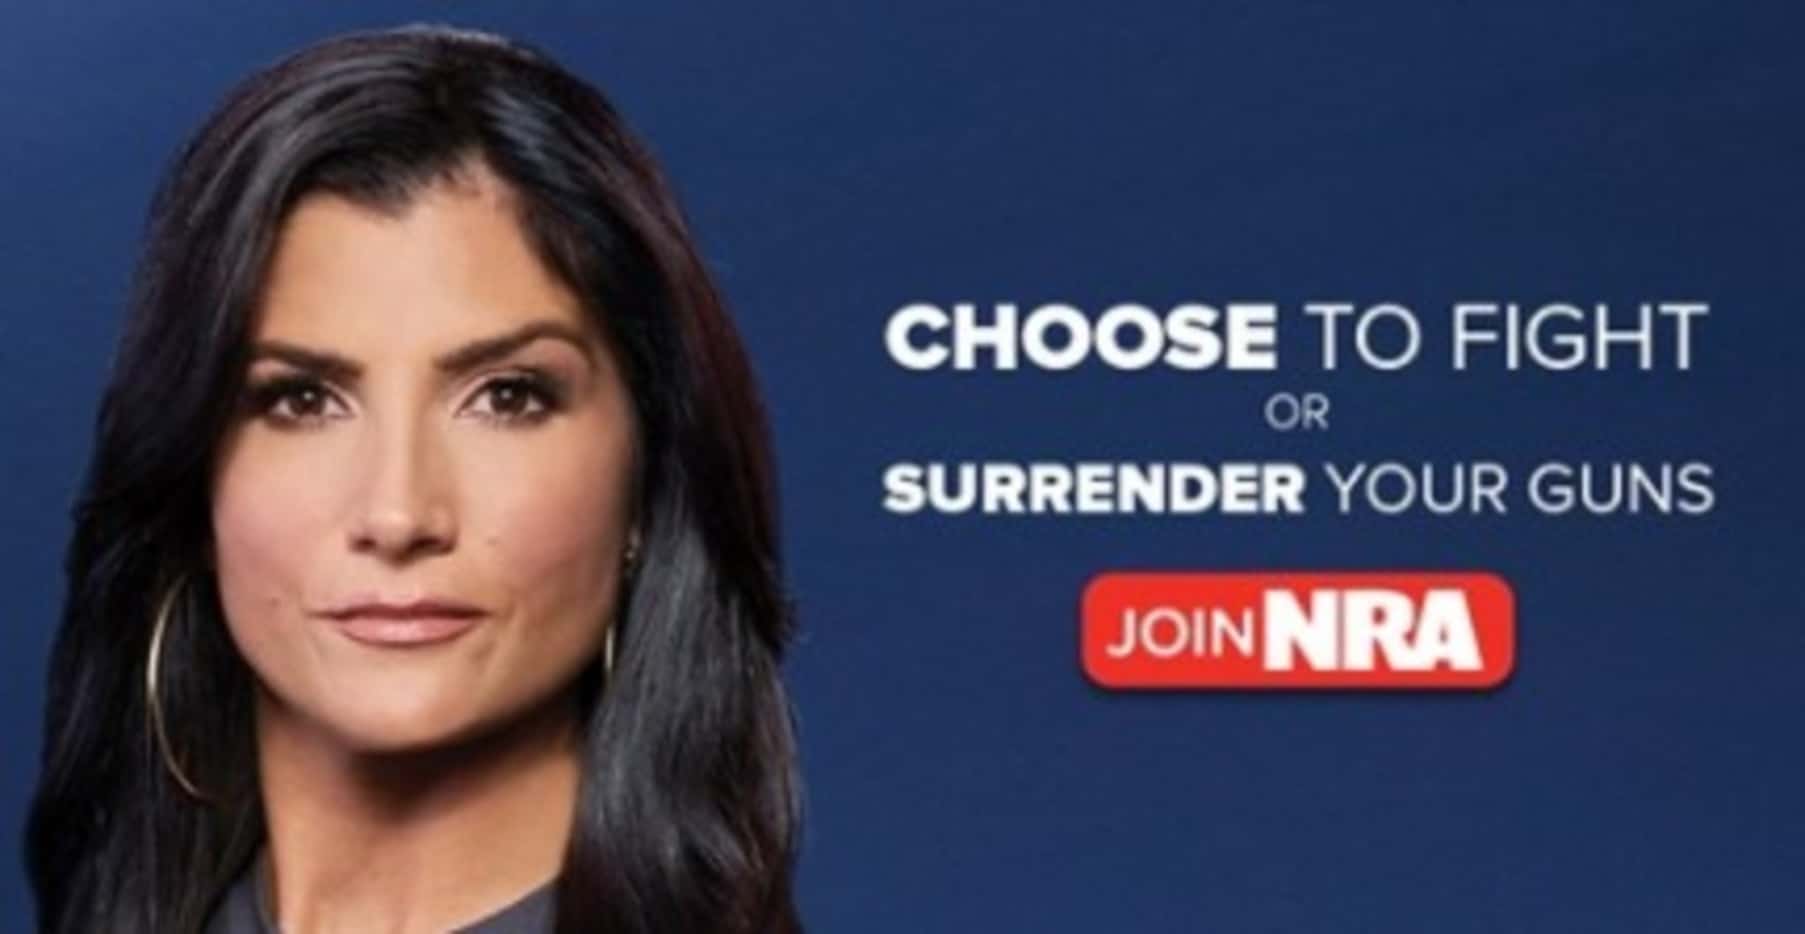 Dana Loesch, a Dallas-based host on NRA TV, was featured on a recent NRA ad warning of gun...